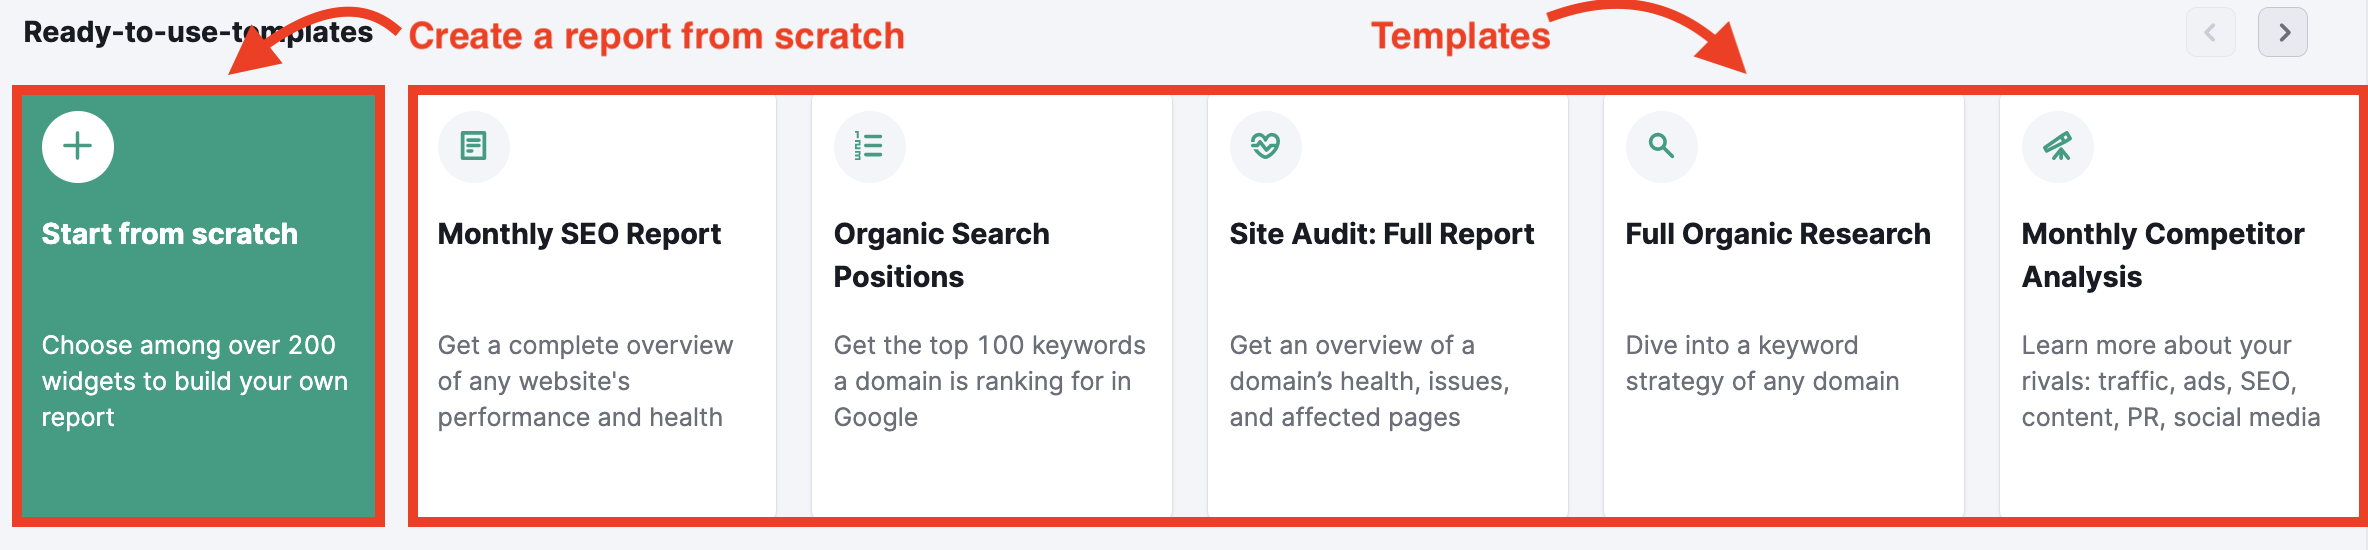 Report Automation with Semrush image 3